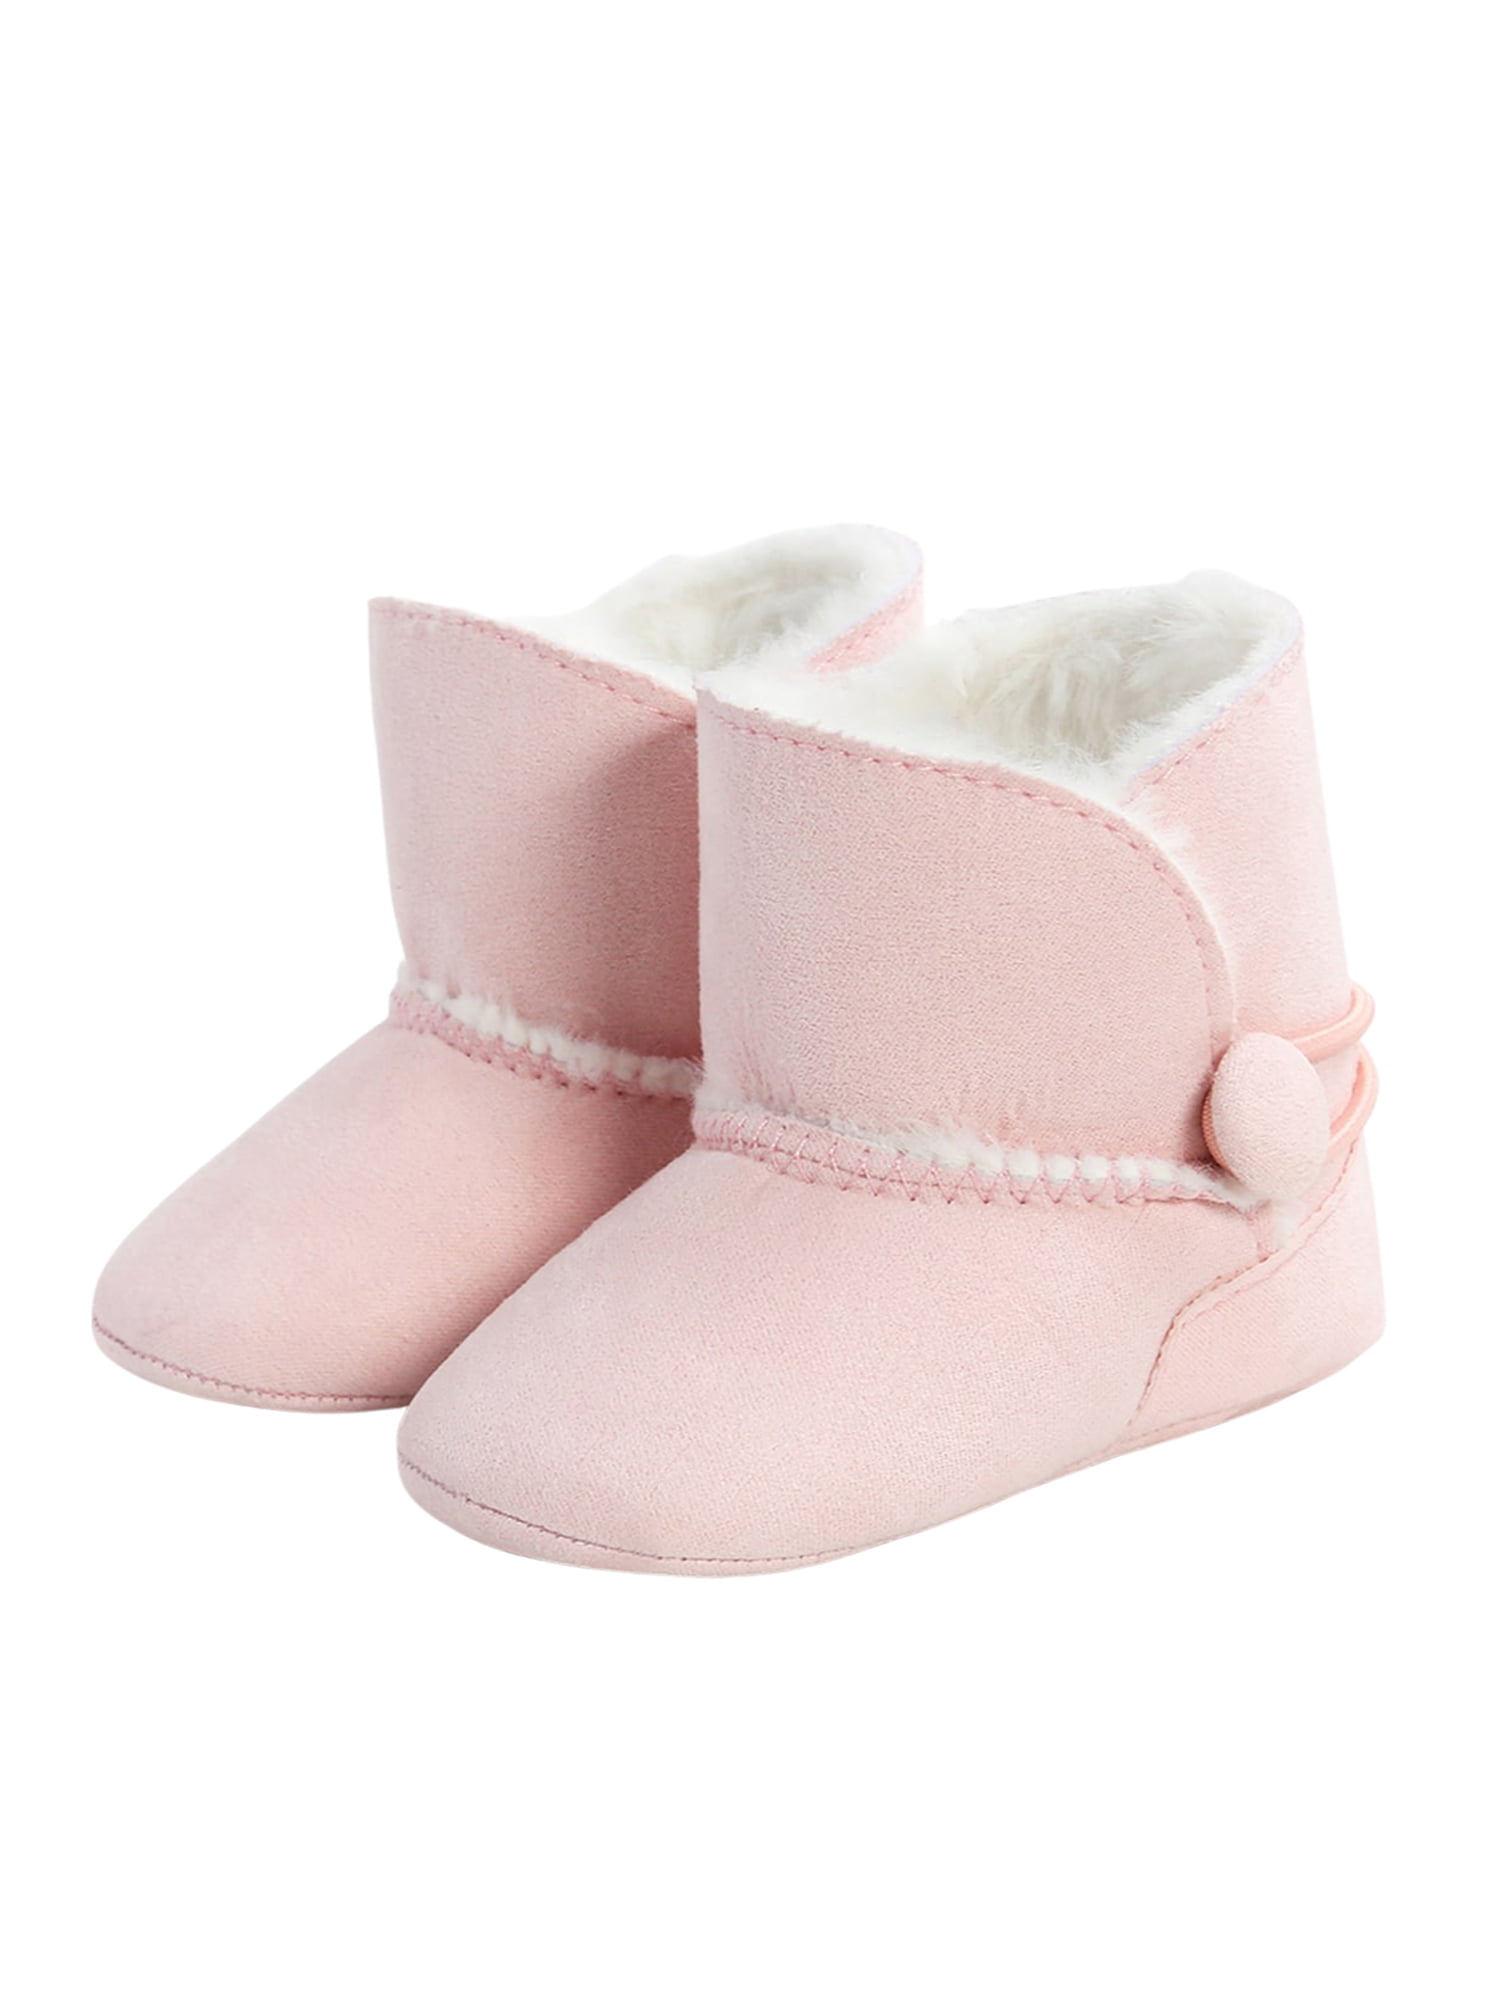 IOO Baby Girls Boys Plush-Filled Bailey Button Snow Boots Warm Winter Flat Shoes Toddler/Little Kid